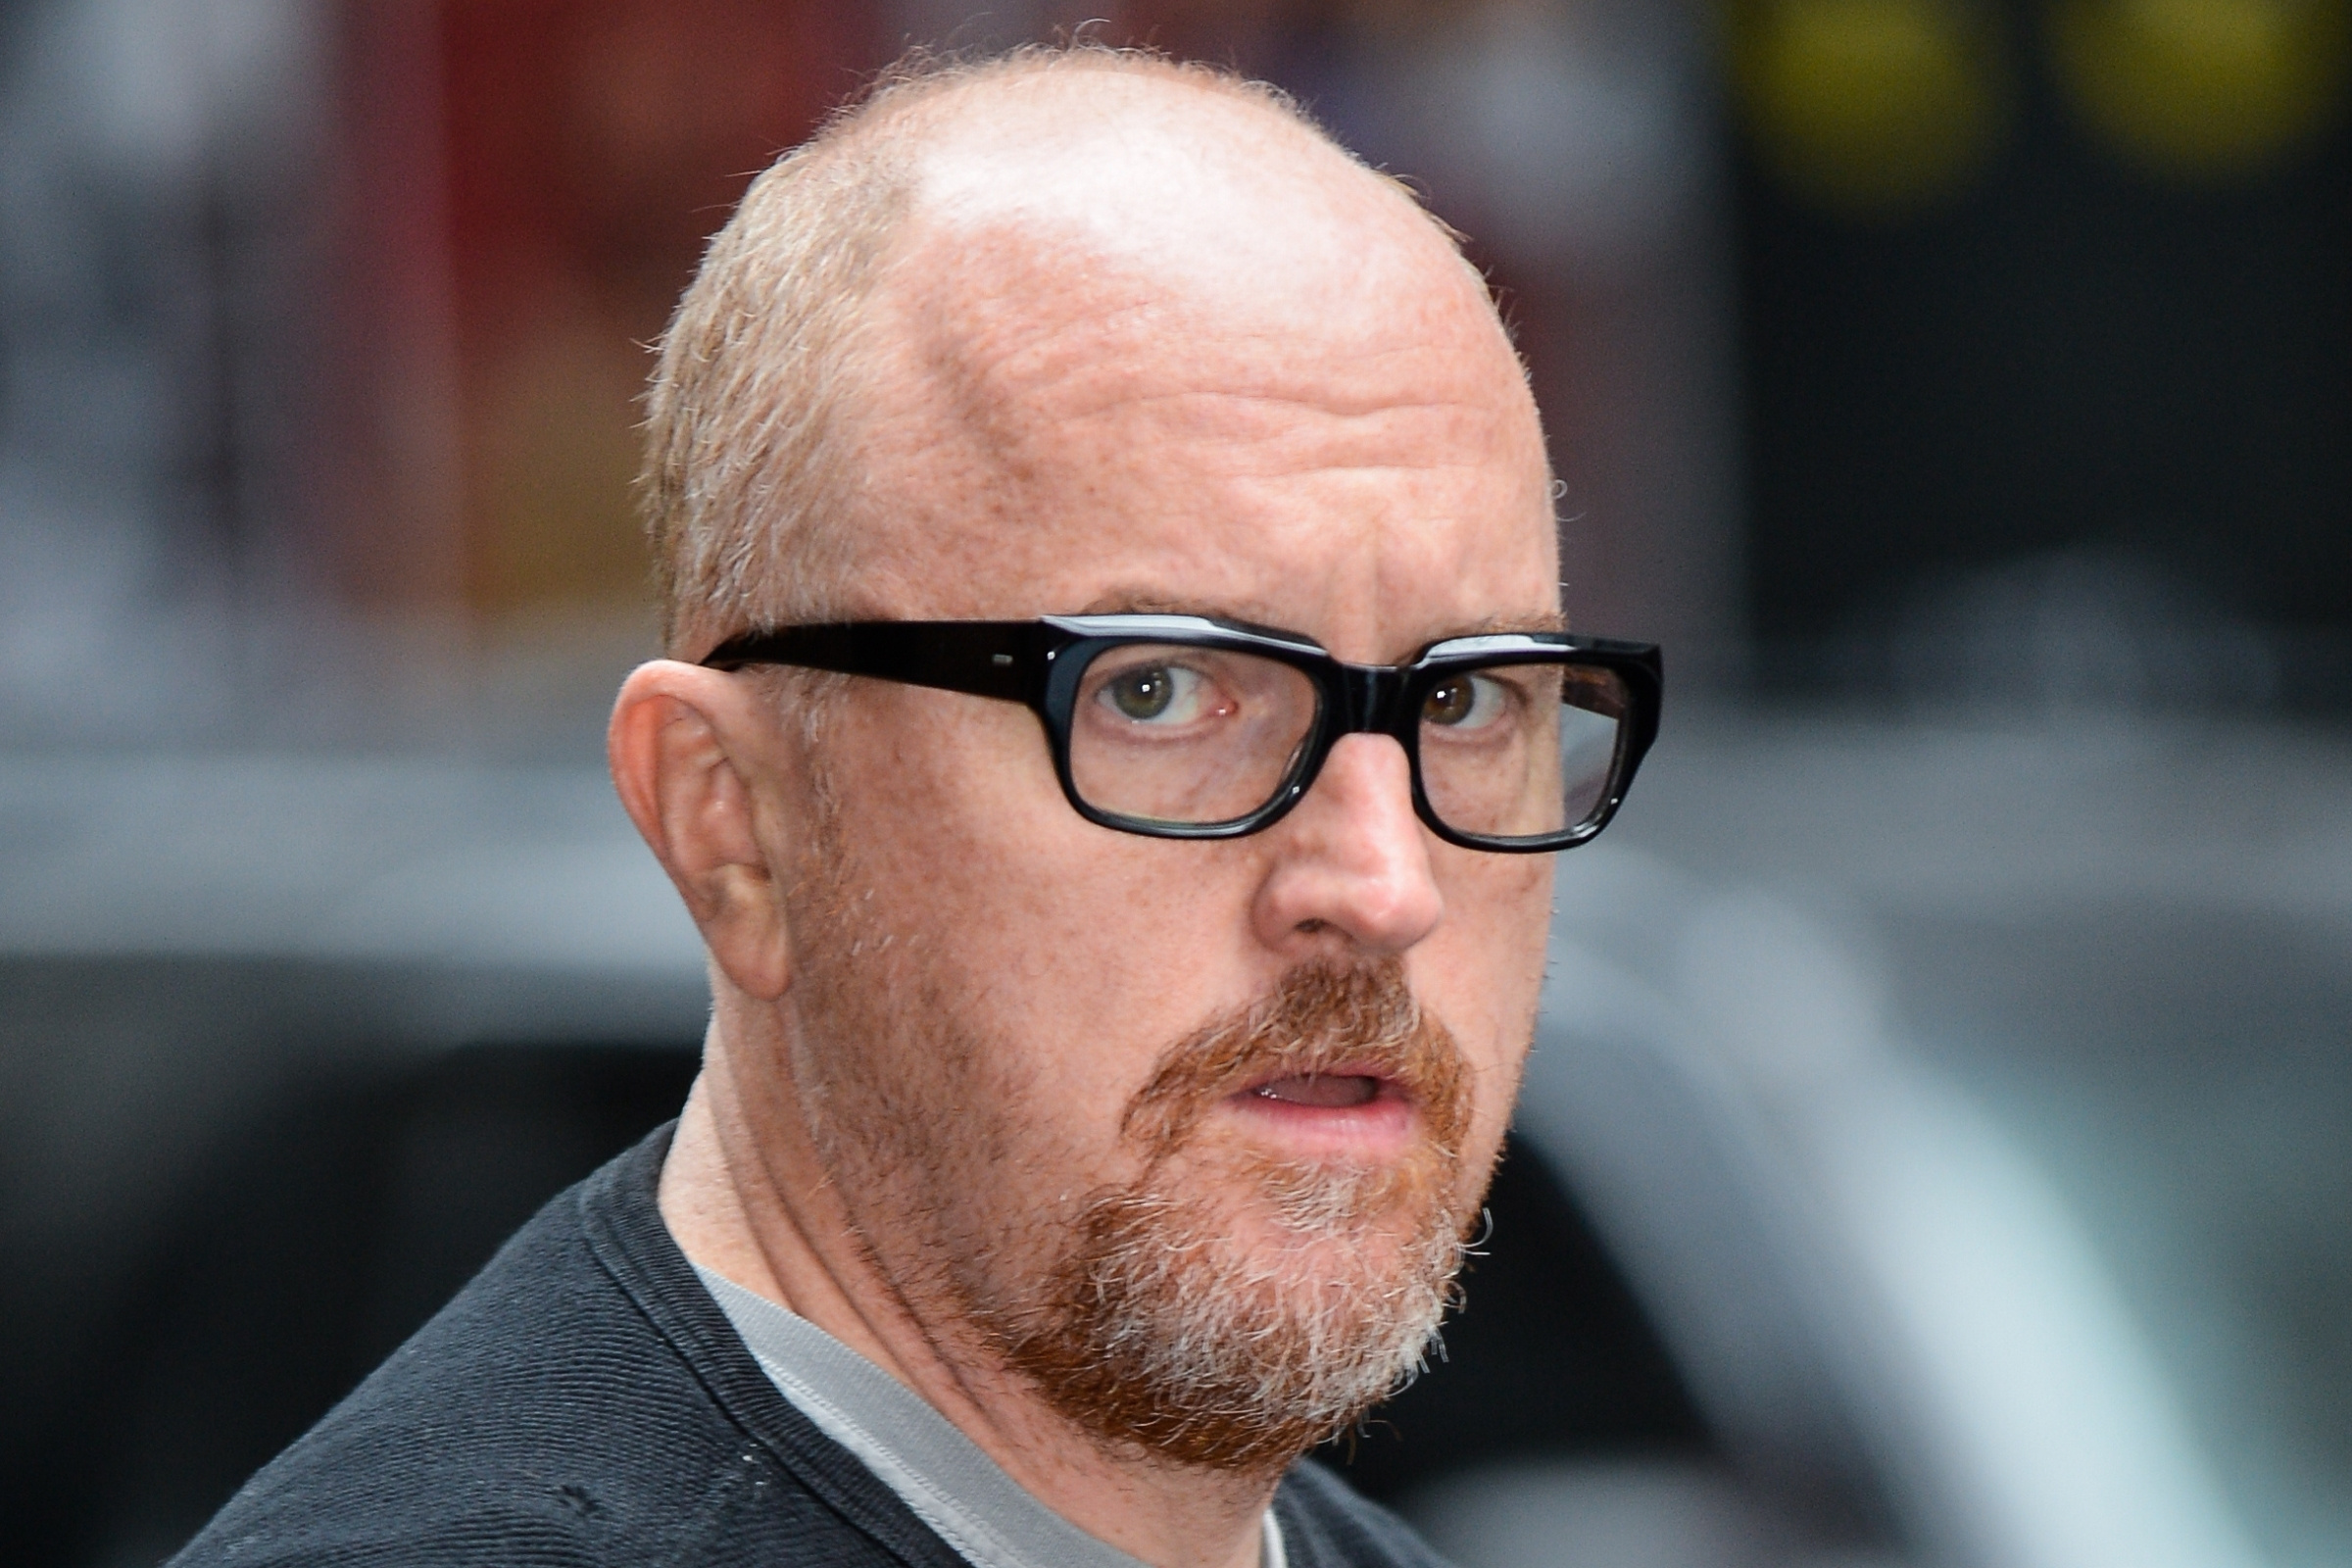 What can a new documentary tell us about the Louis CK scandal